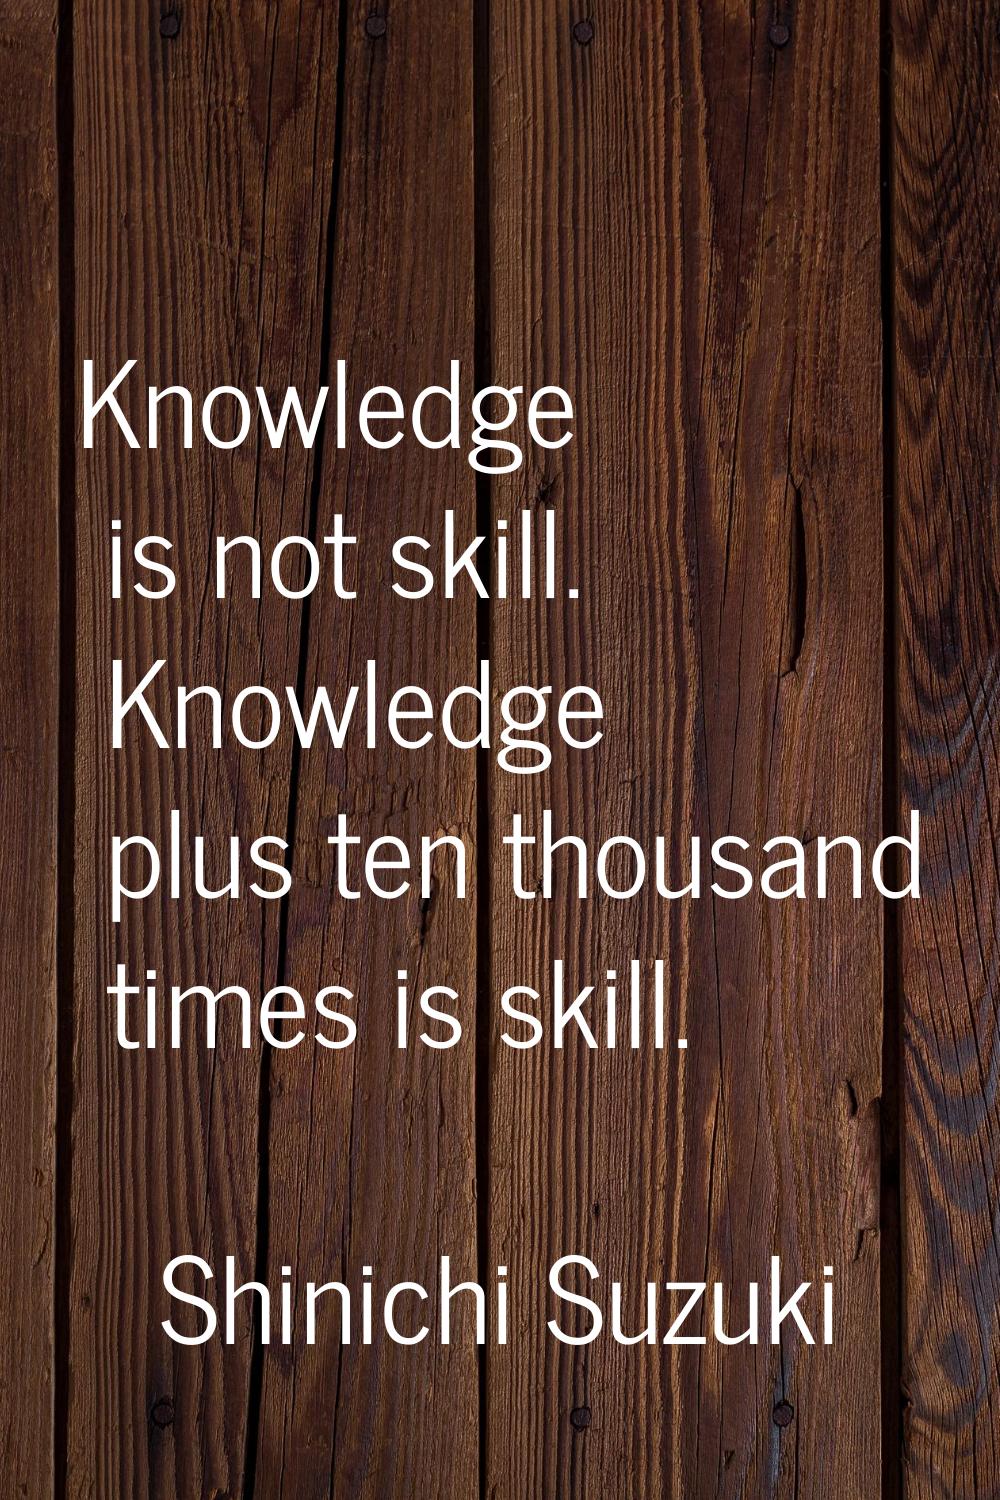 Knowledge is not skill. Knowledge plus ten thousand times is skill.